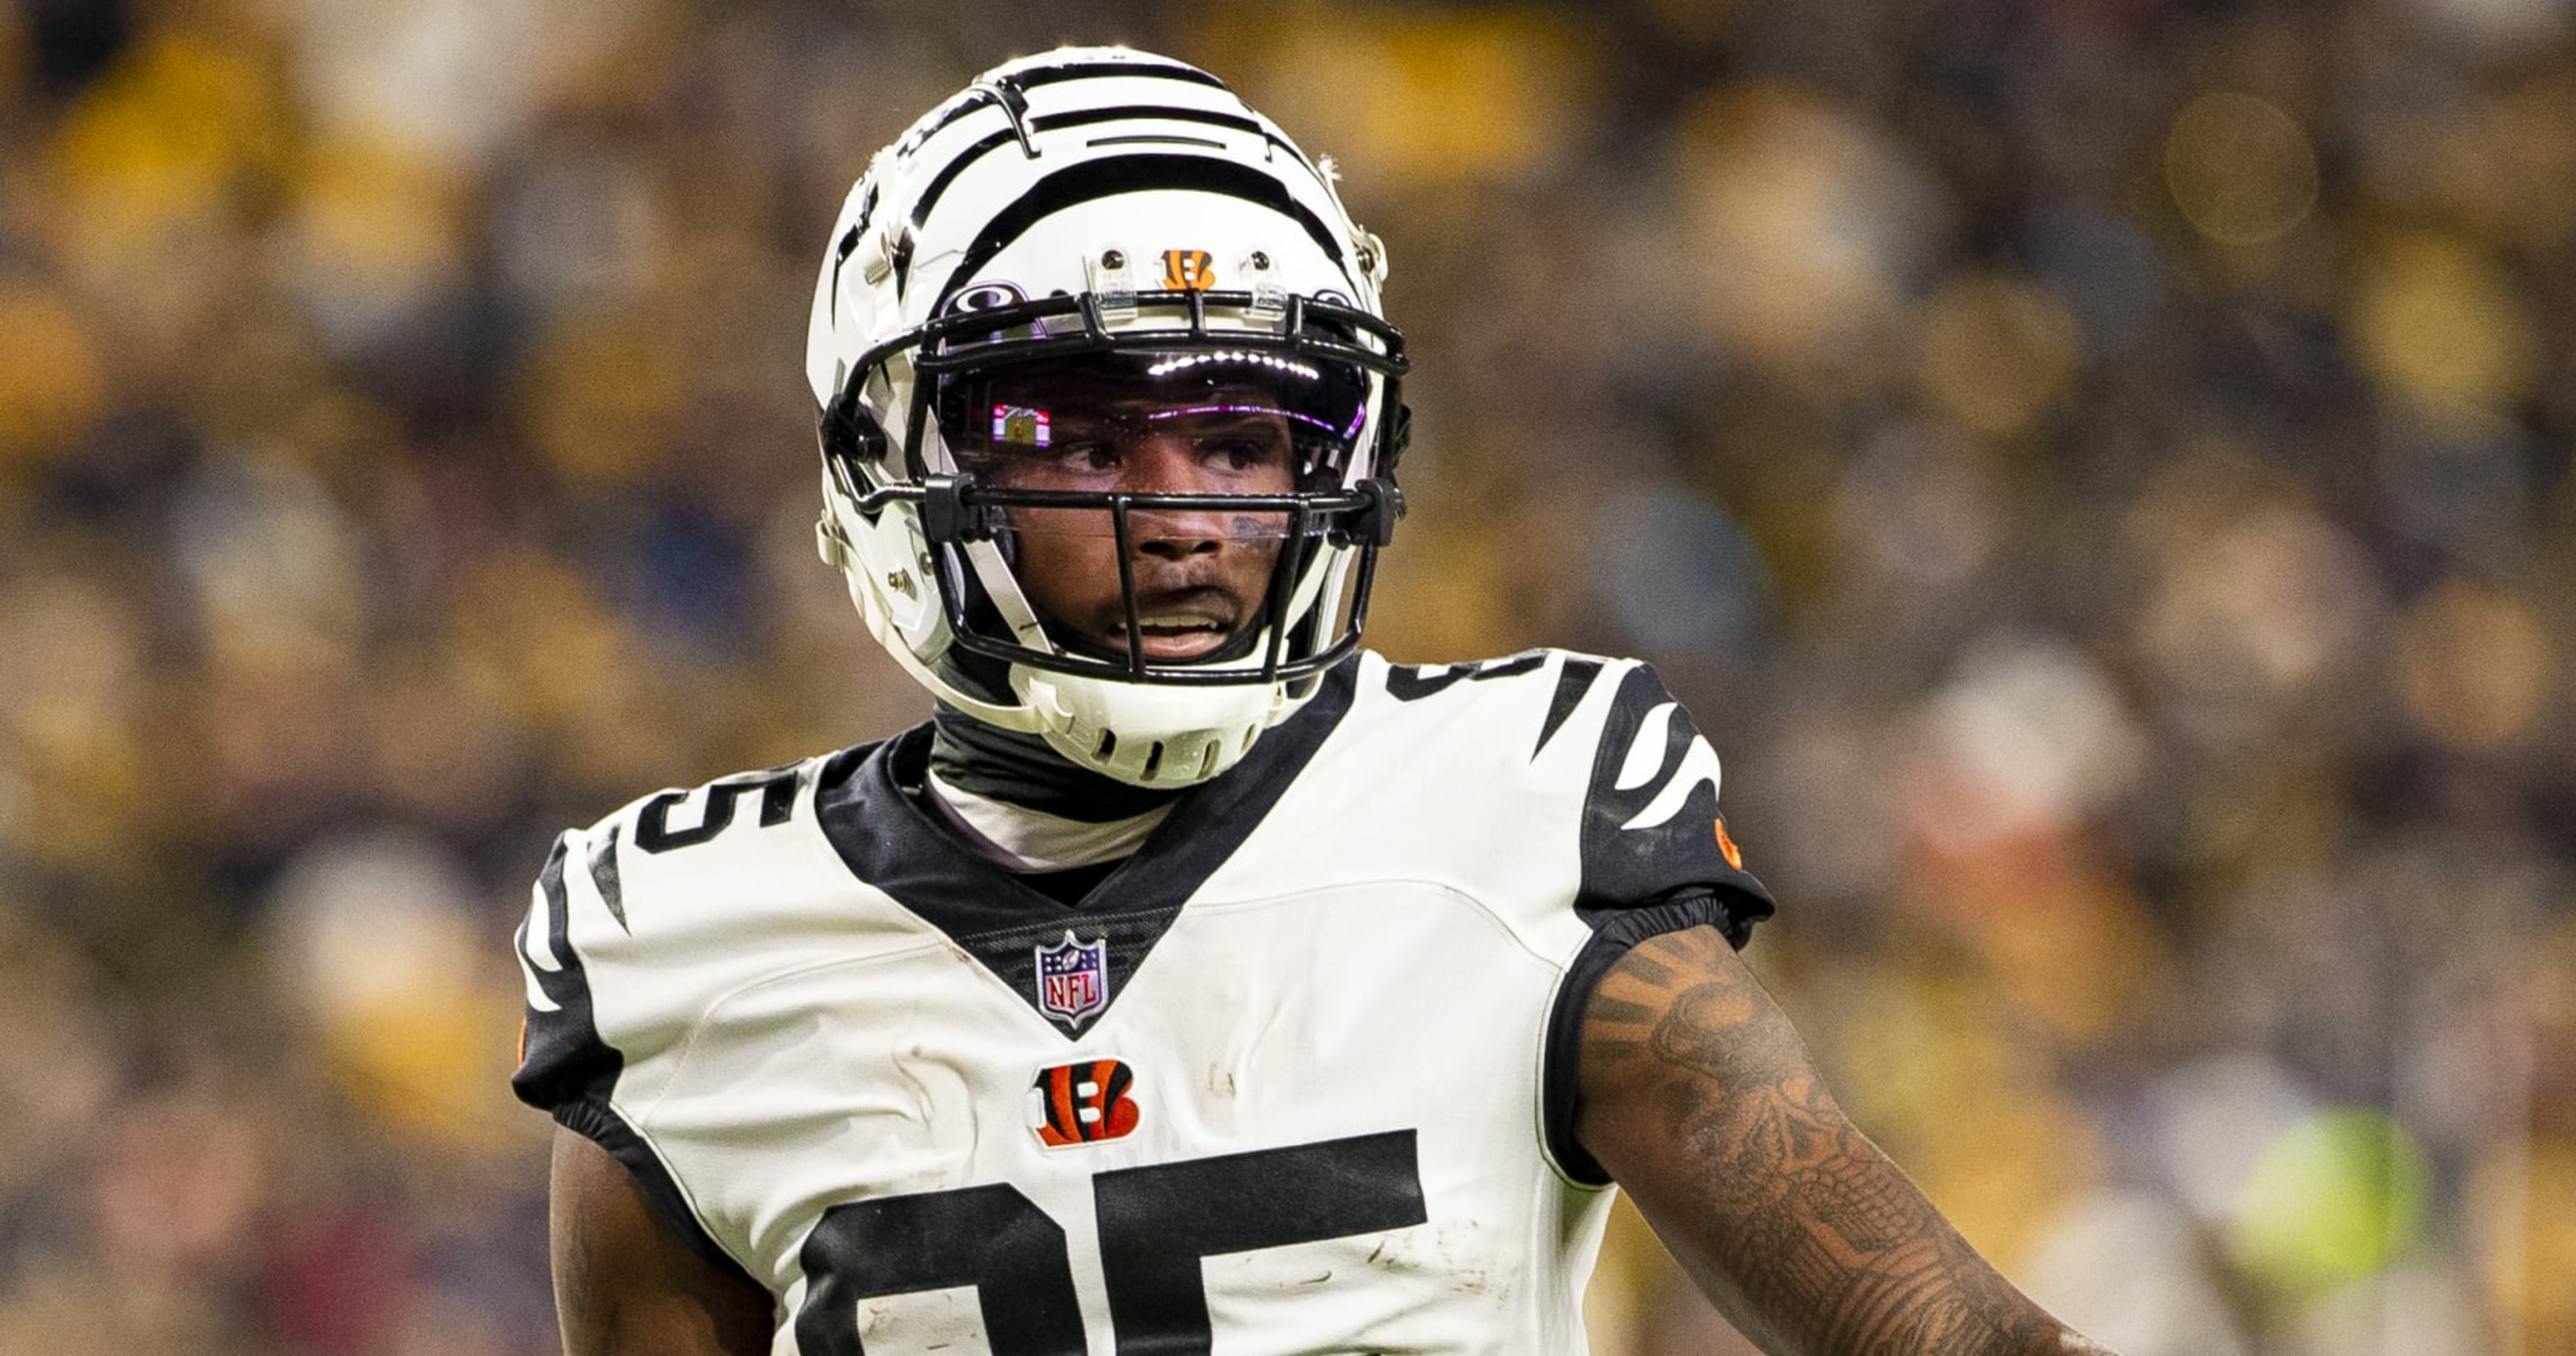 Report: Tee Higgins Trade Calls Were Not 'Entertained' by Bengals at NFL Deadline